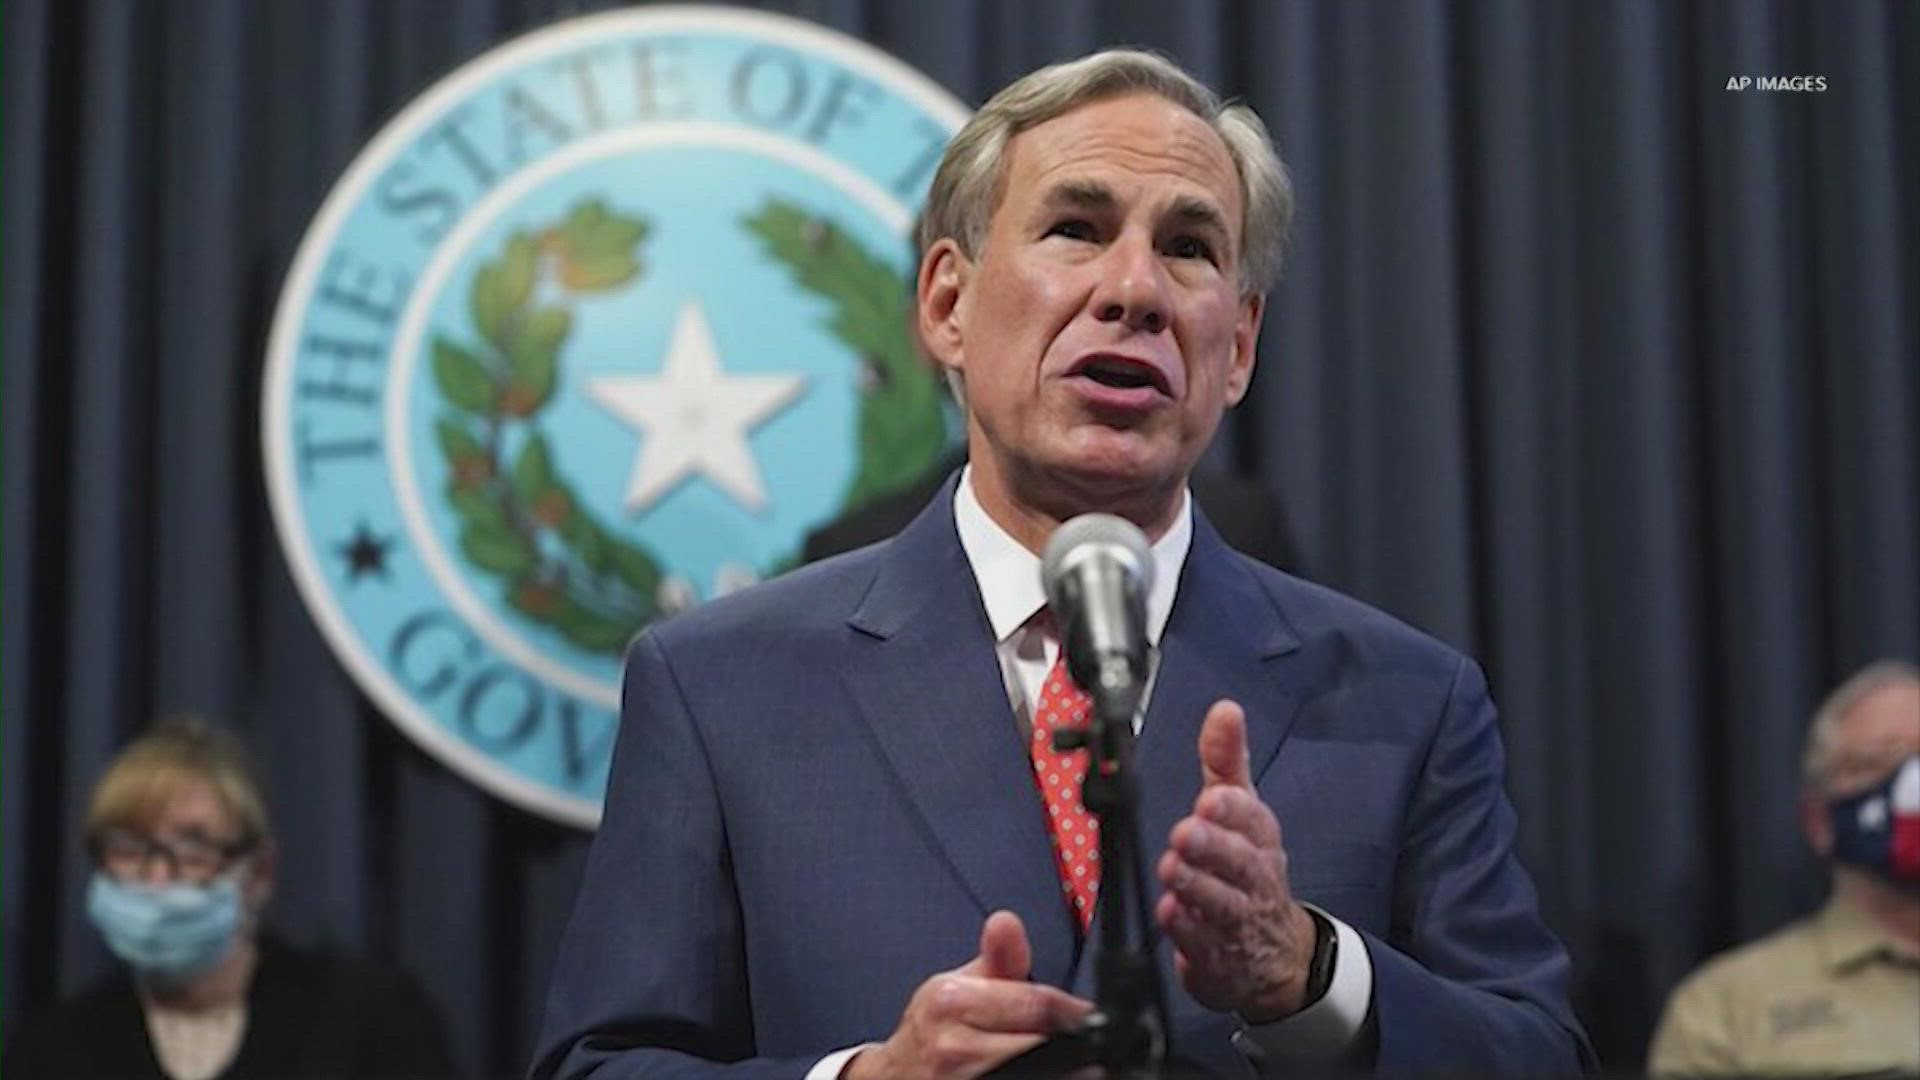 A previous order from Gov. Greg Abbott said no government entity could require an individual to receive a COVID-19 vaccine under emergency use authorization.